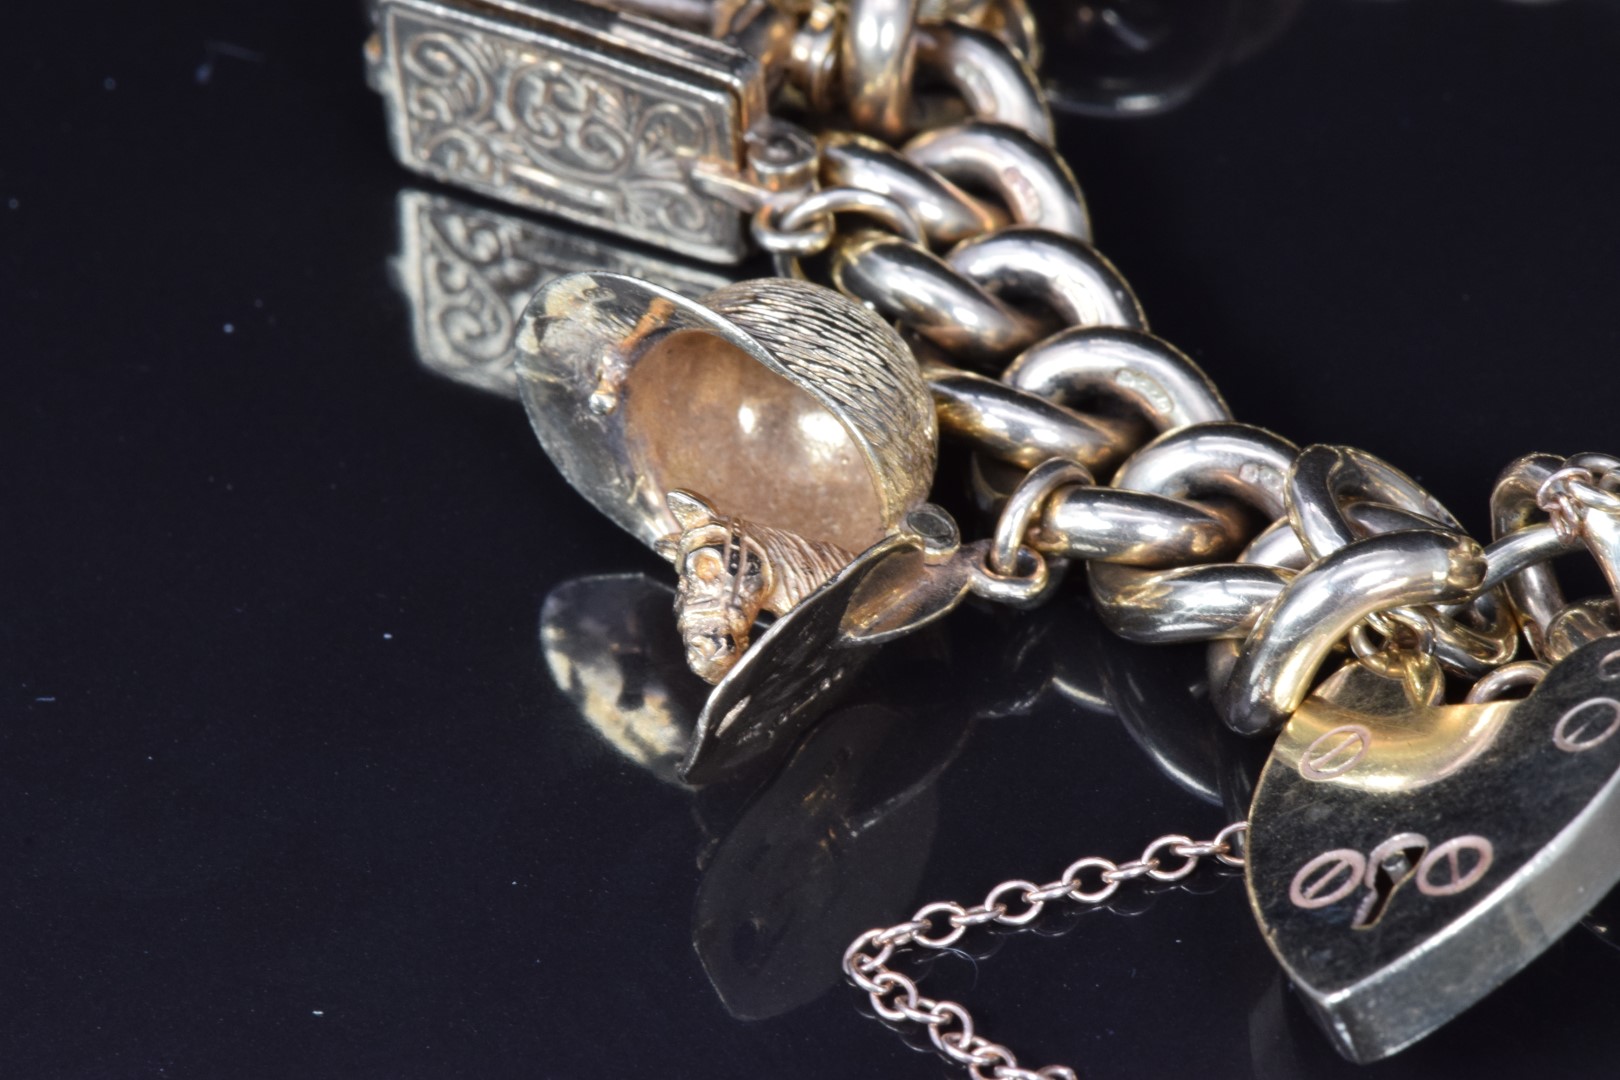 A 9ct gold charm bracelet with five 9ct gold charms including sewing machine, fob, jockey's hat - Image 3 of 7